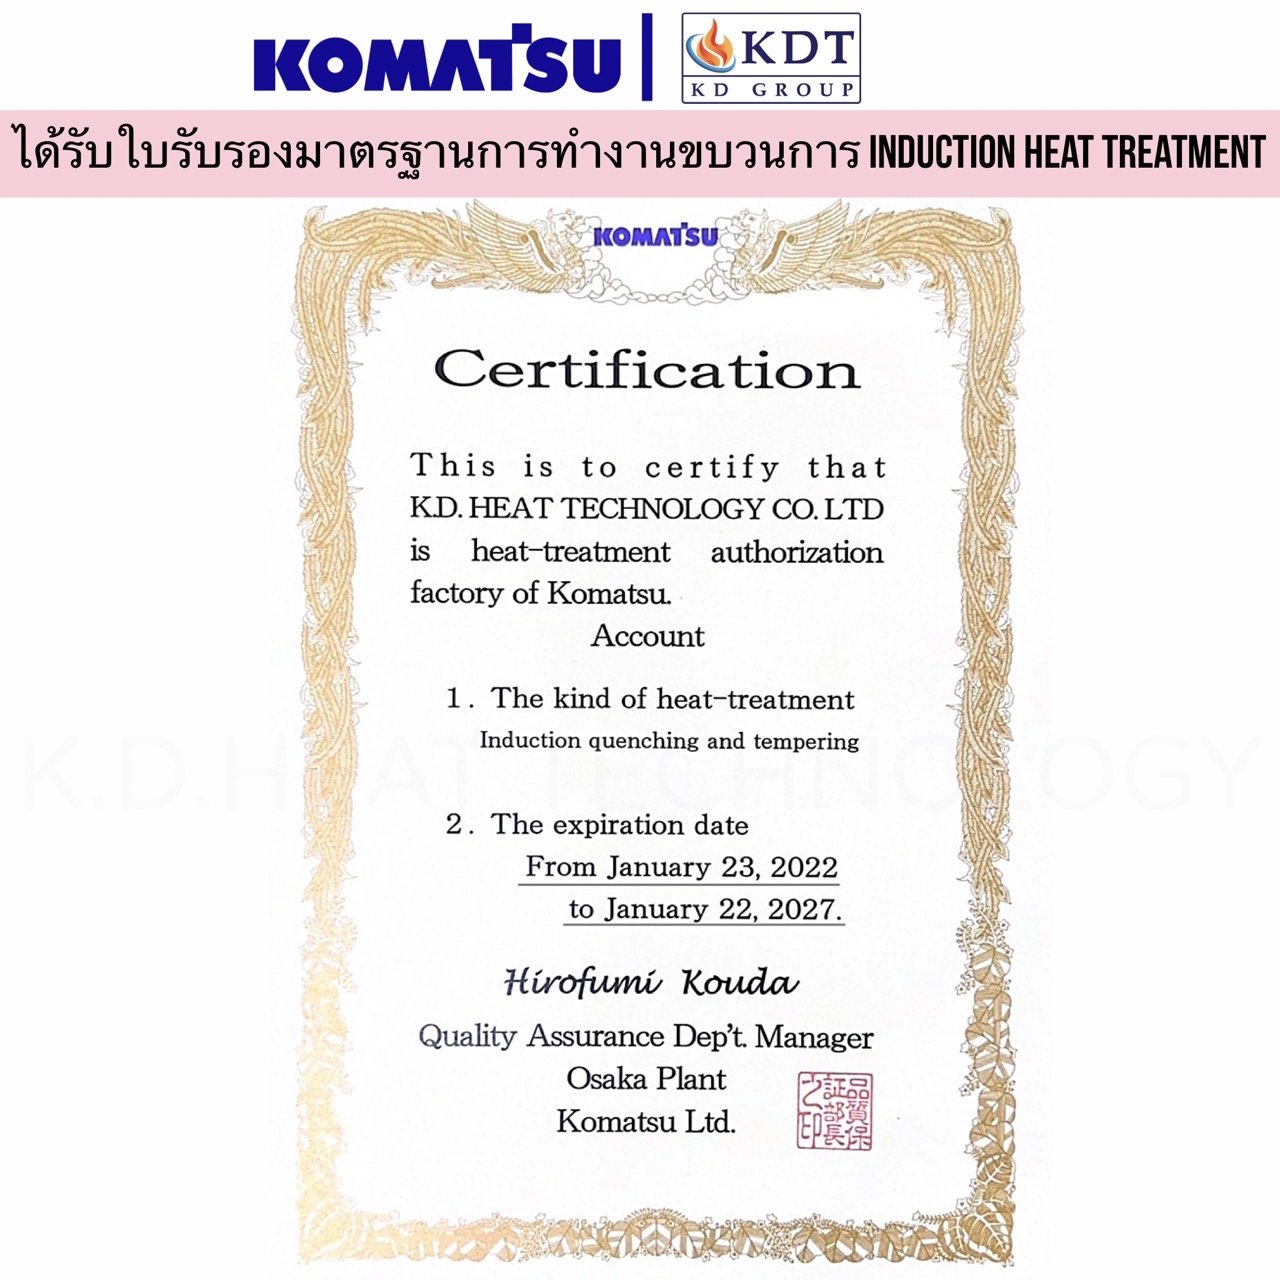 K.D. Heat Technology received a certificate of induction quenching and tempering